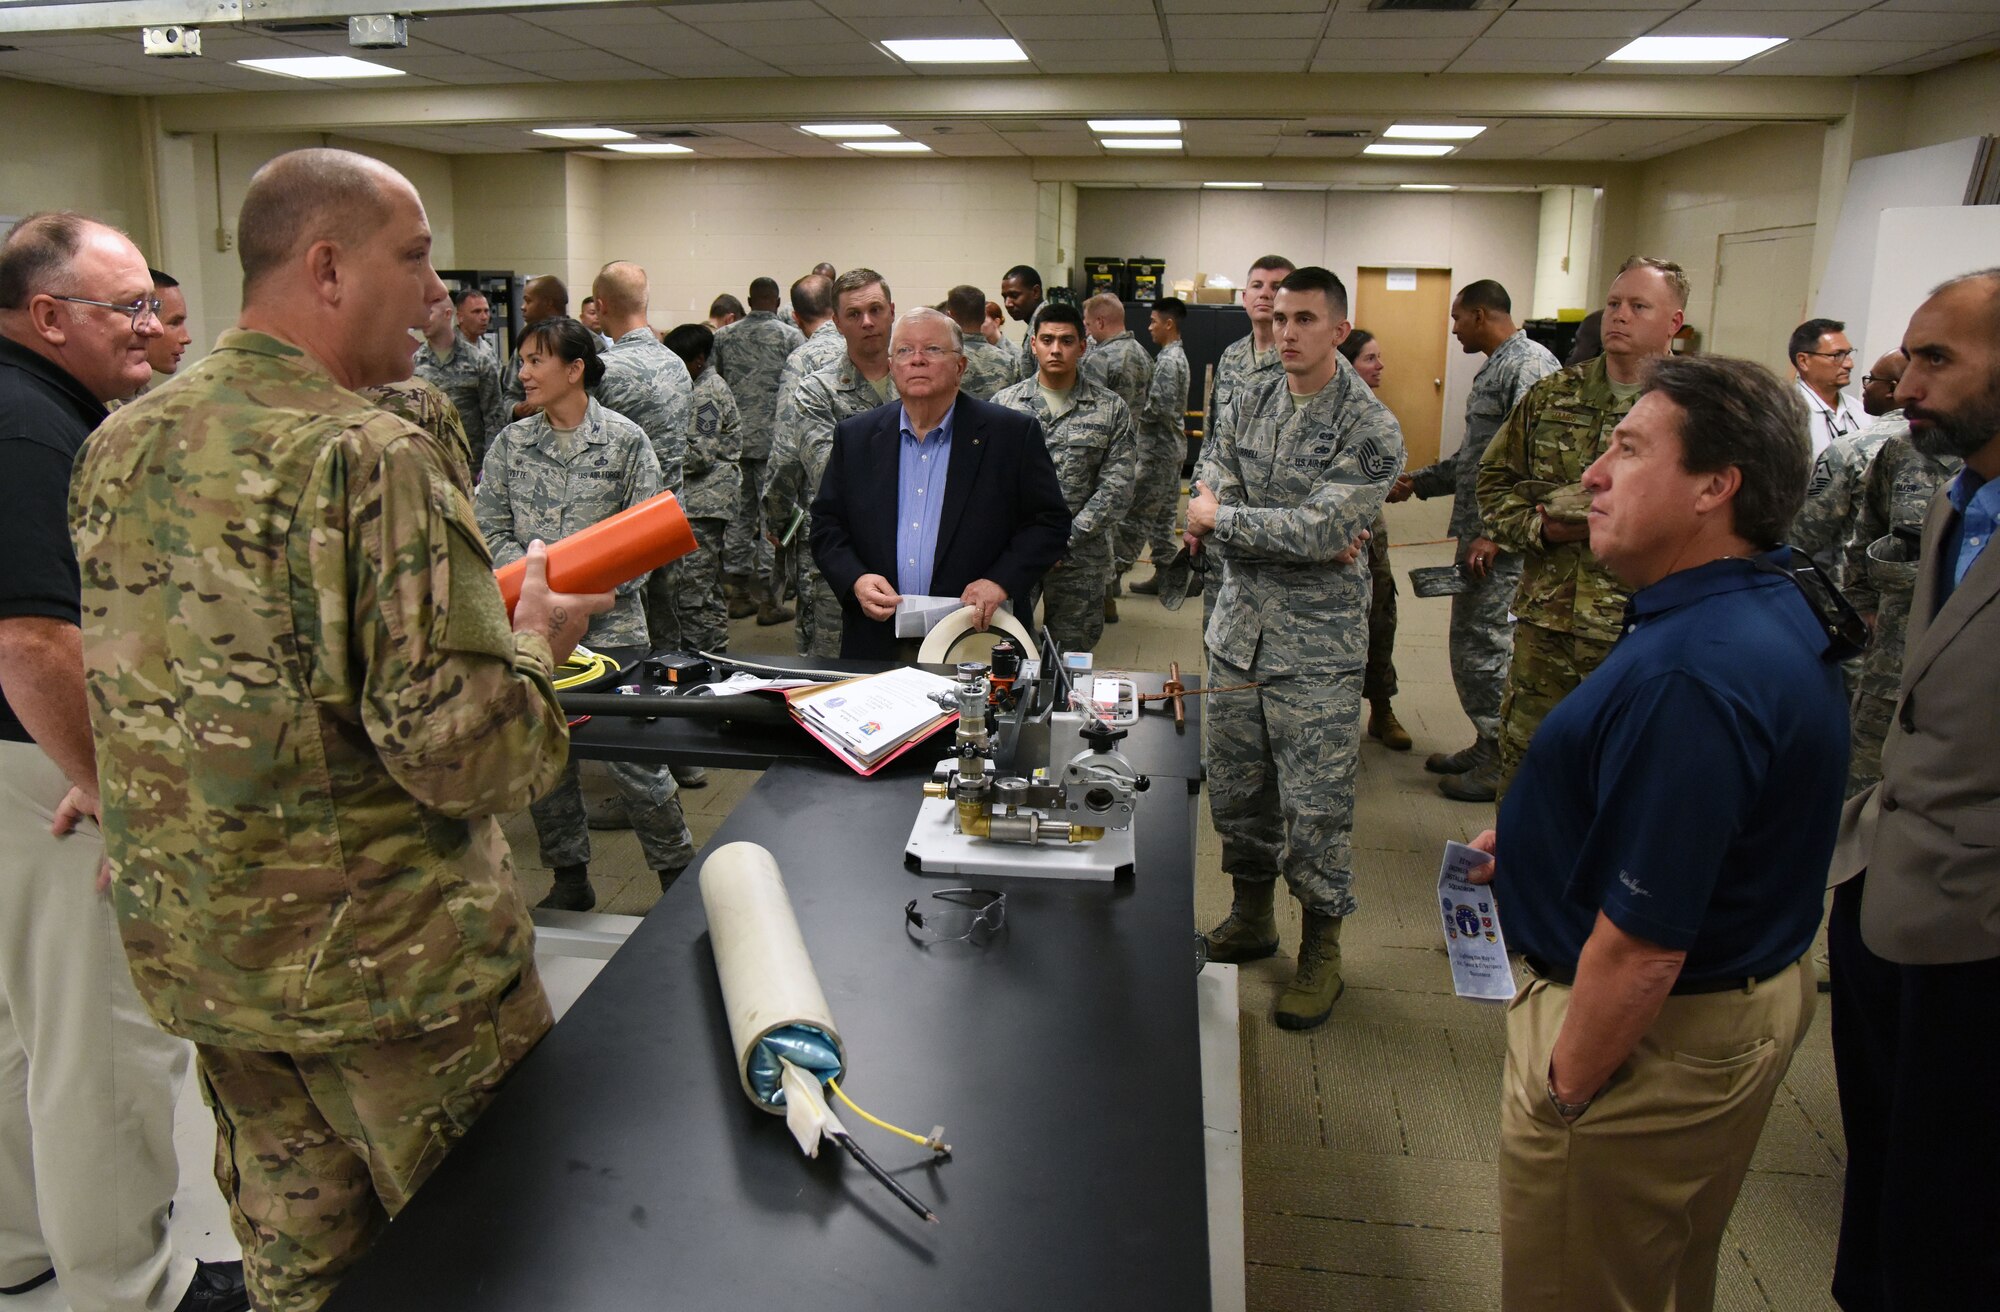 U.S. Air Force Tech. Sgt. Michael Williams, 85th Engineering Installation Squadron project engineering NCO in charge, briefs on fiber optic cable equipment during an open house inside Maltby Hall at Keesler Air Force Base, Mississippi, Oct. 11, 2018. Keesler leadership and personnel attended the event to become more familiar with the 85th EIS mission capabilities. (U.S. Air Force photo by Kemberly Groue)